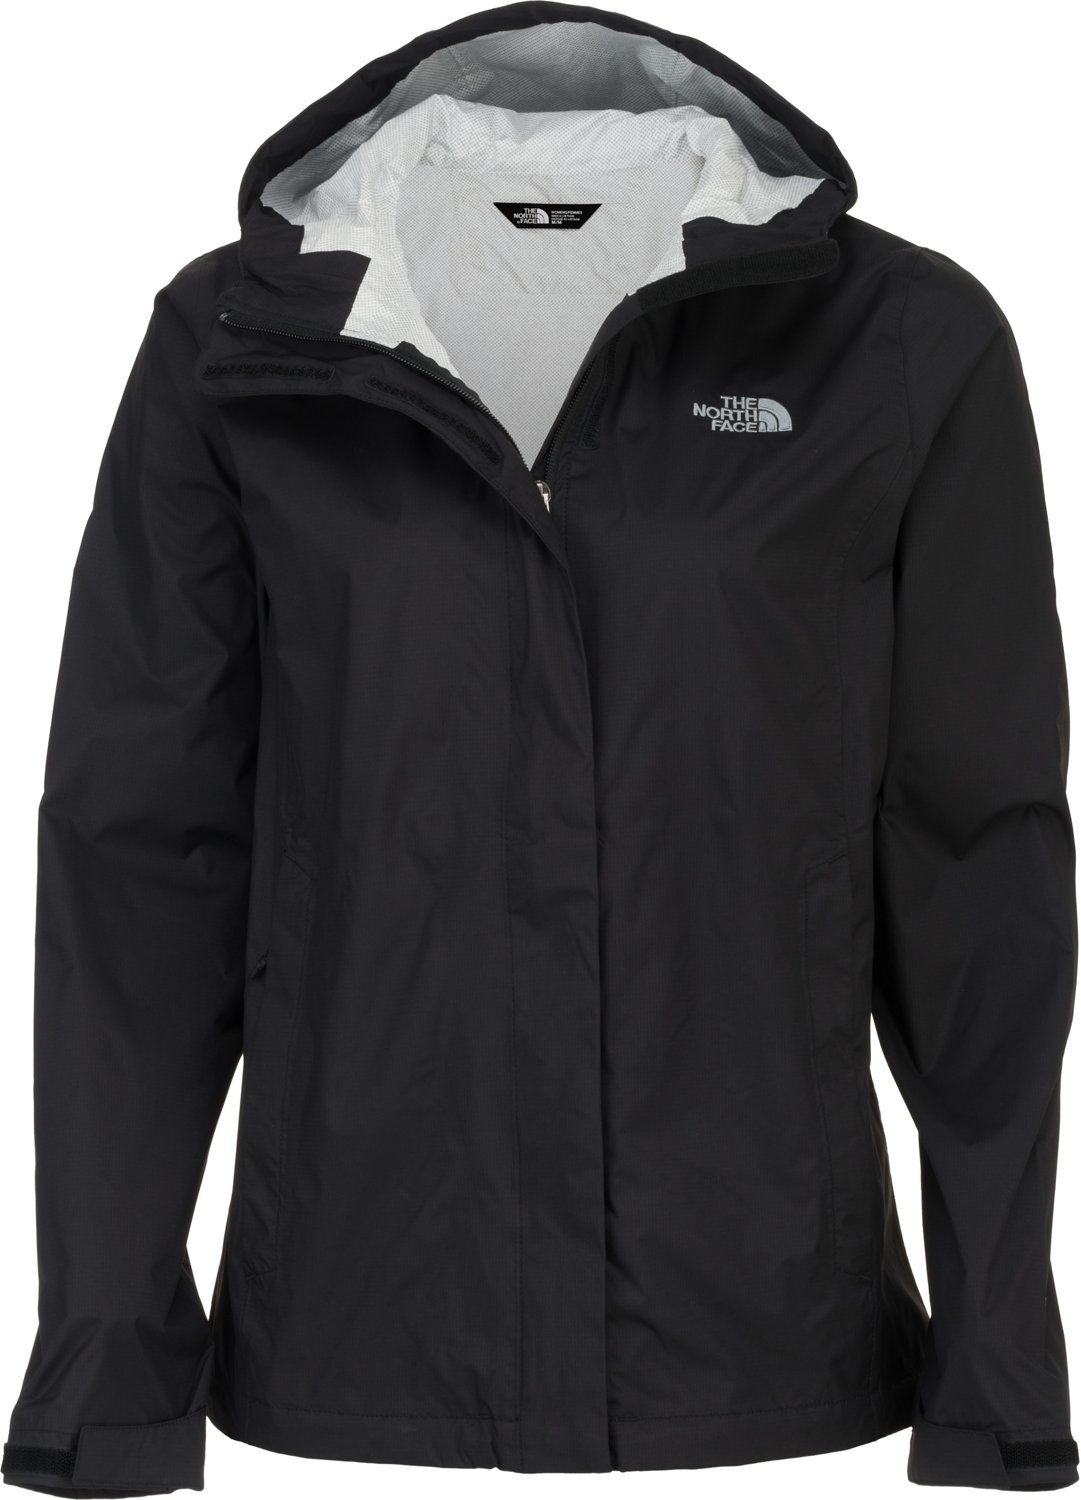 north face women's jacket academy 